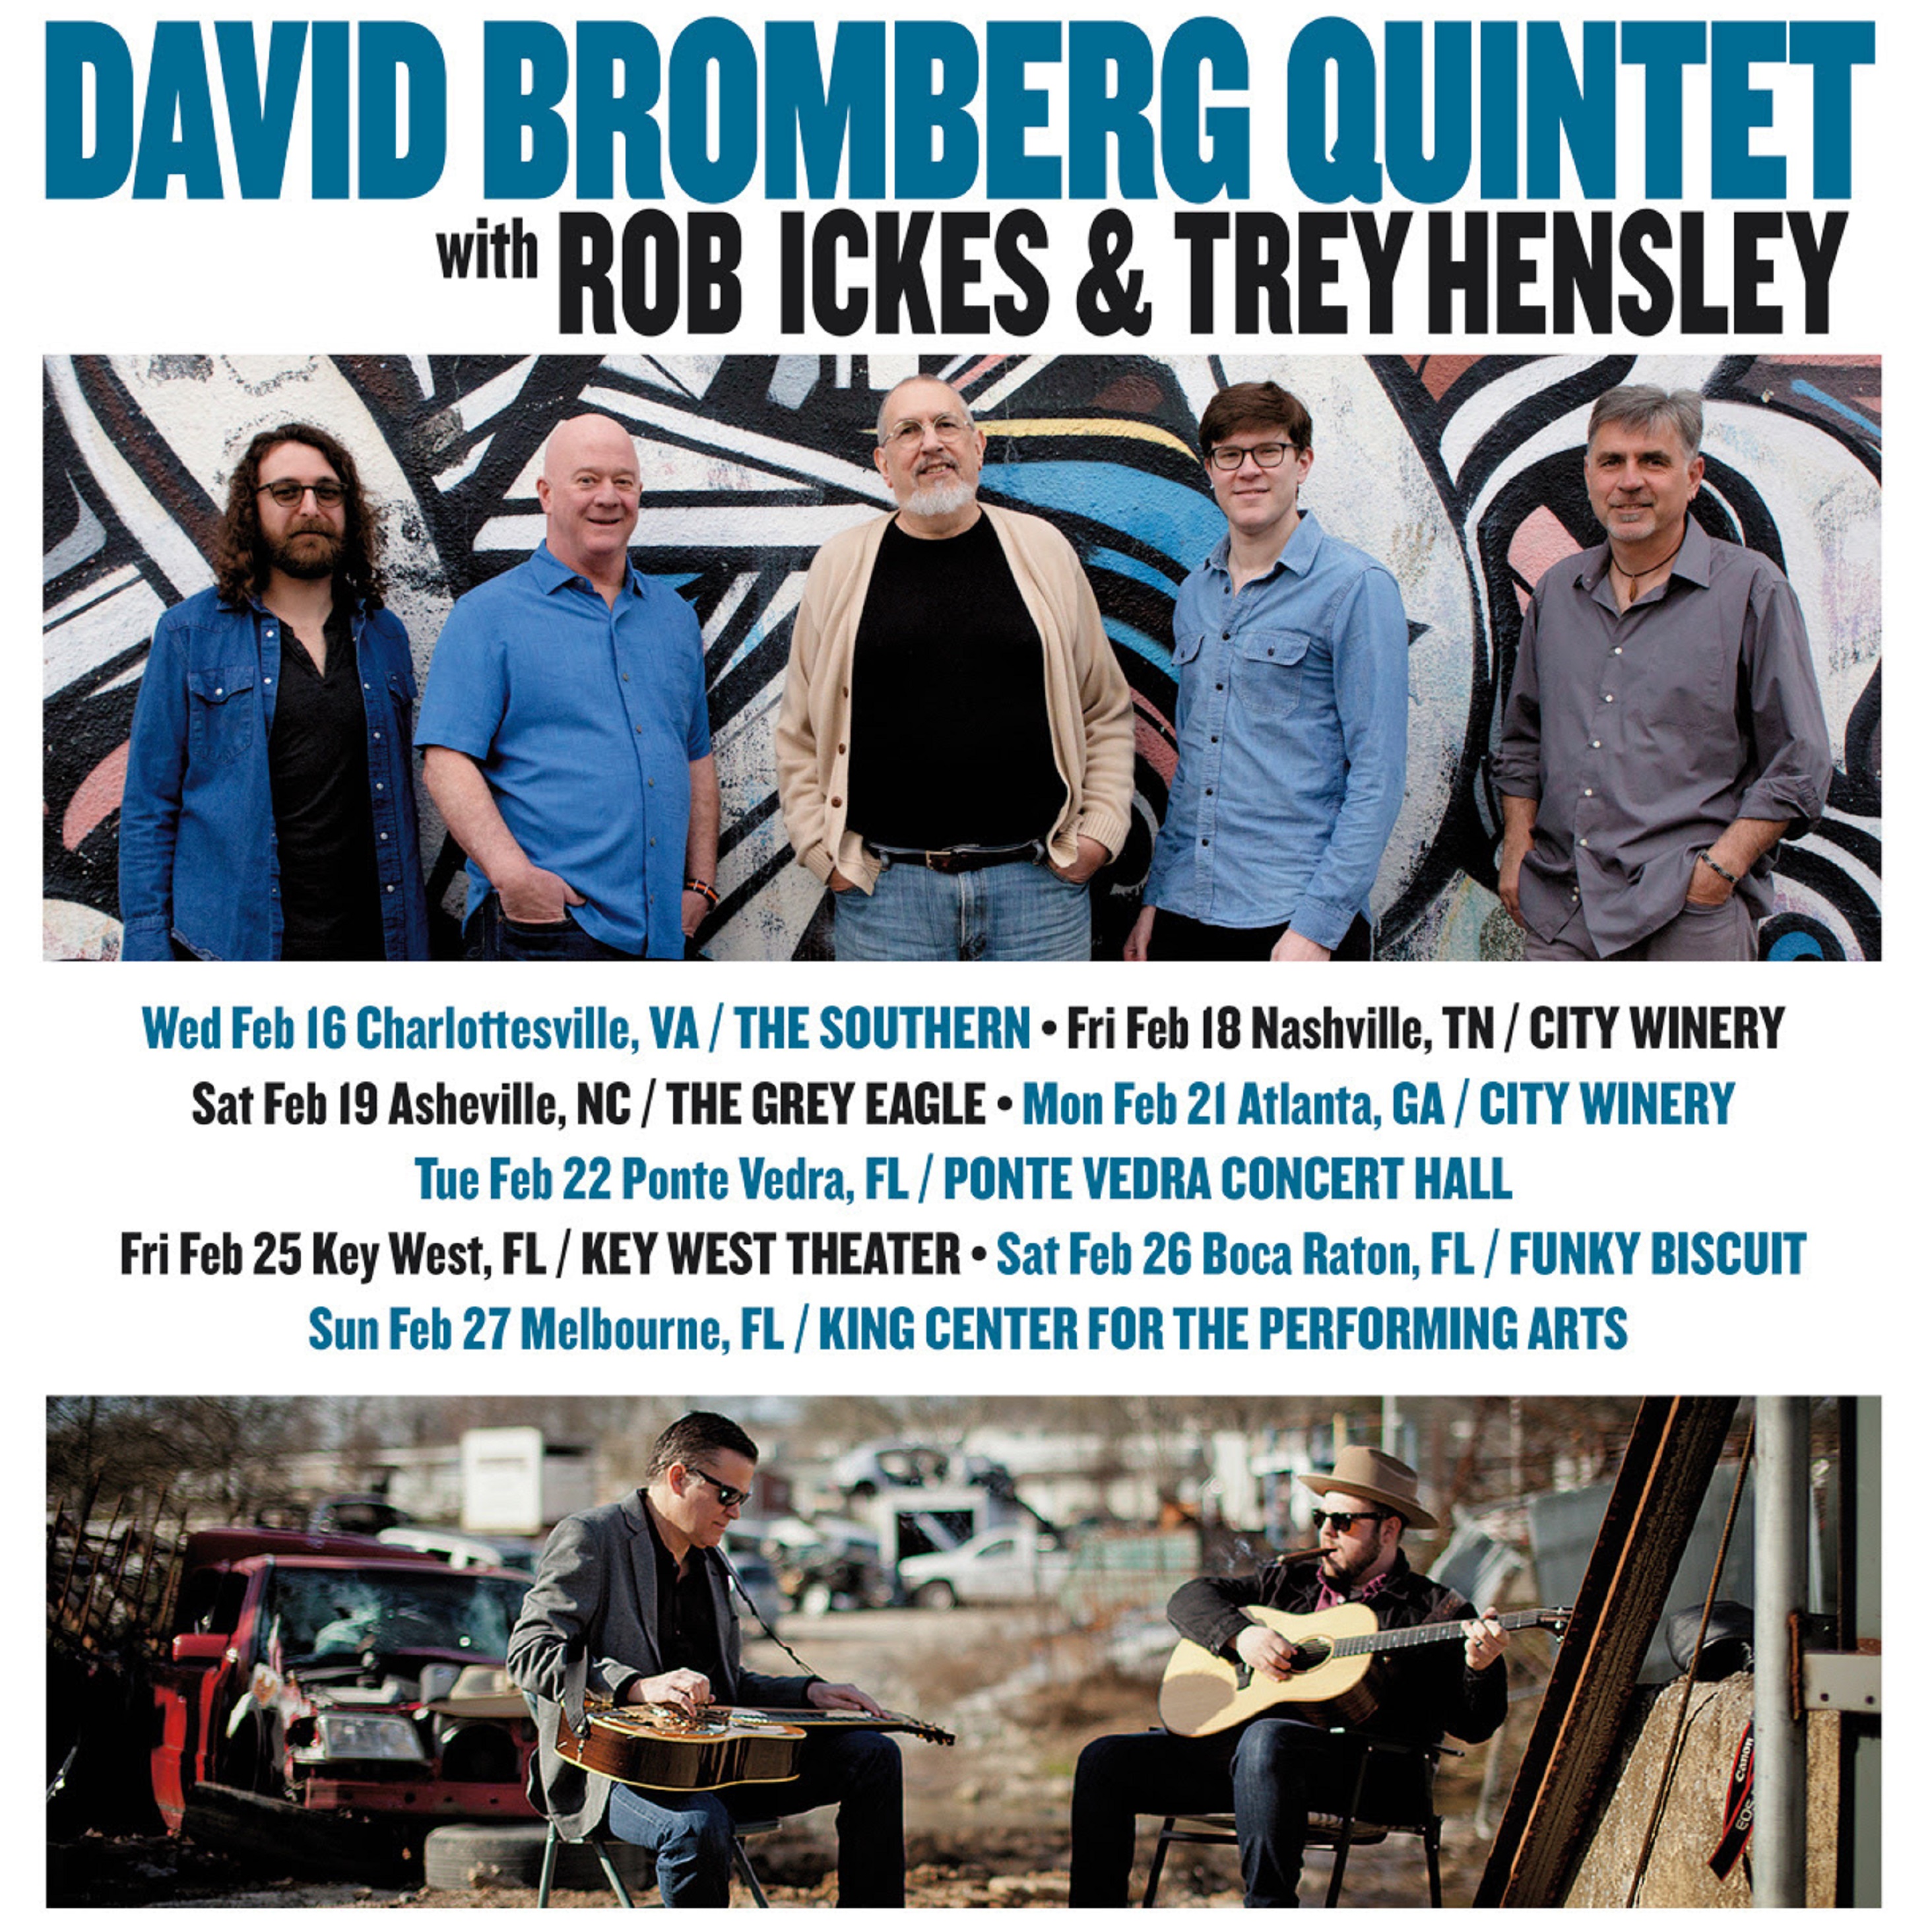 David Bromberg Quintet joins forces with Rob Ickes & Trey Hensley for February 2022 Tour